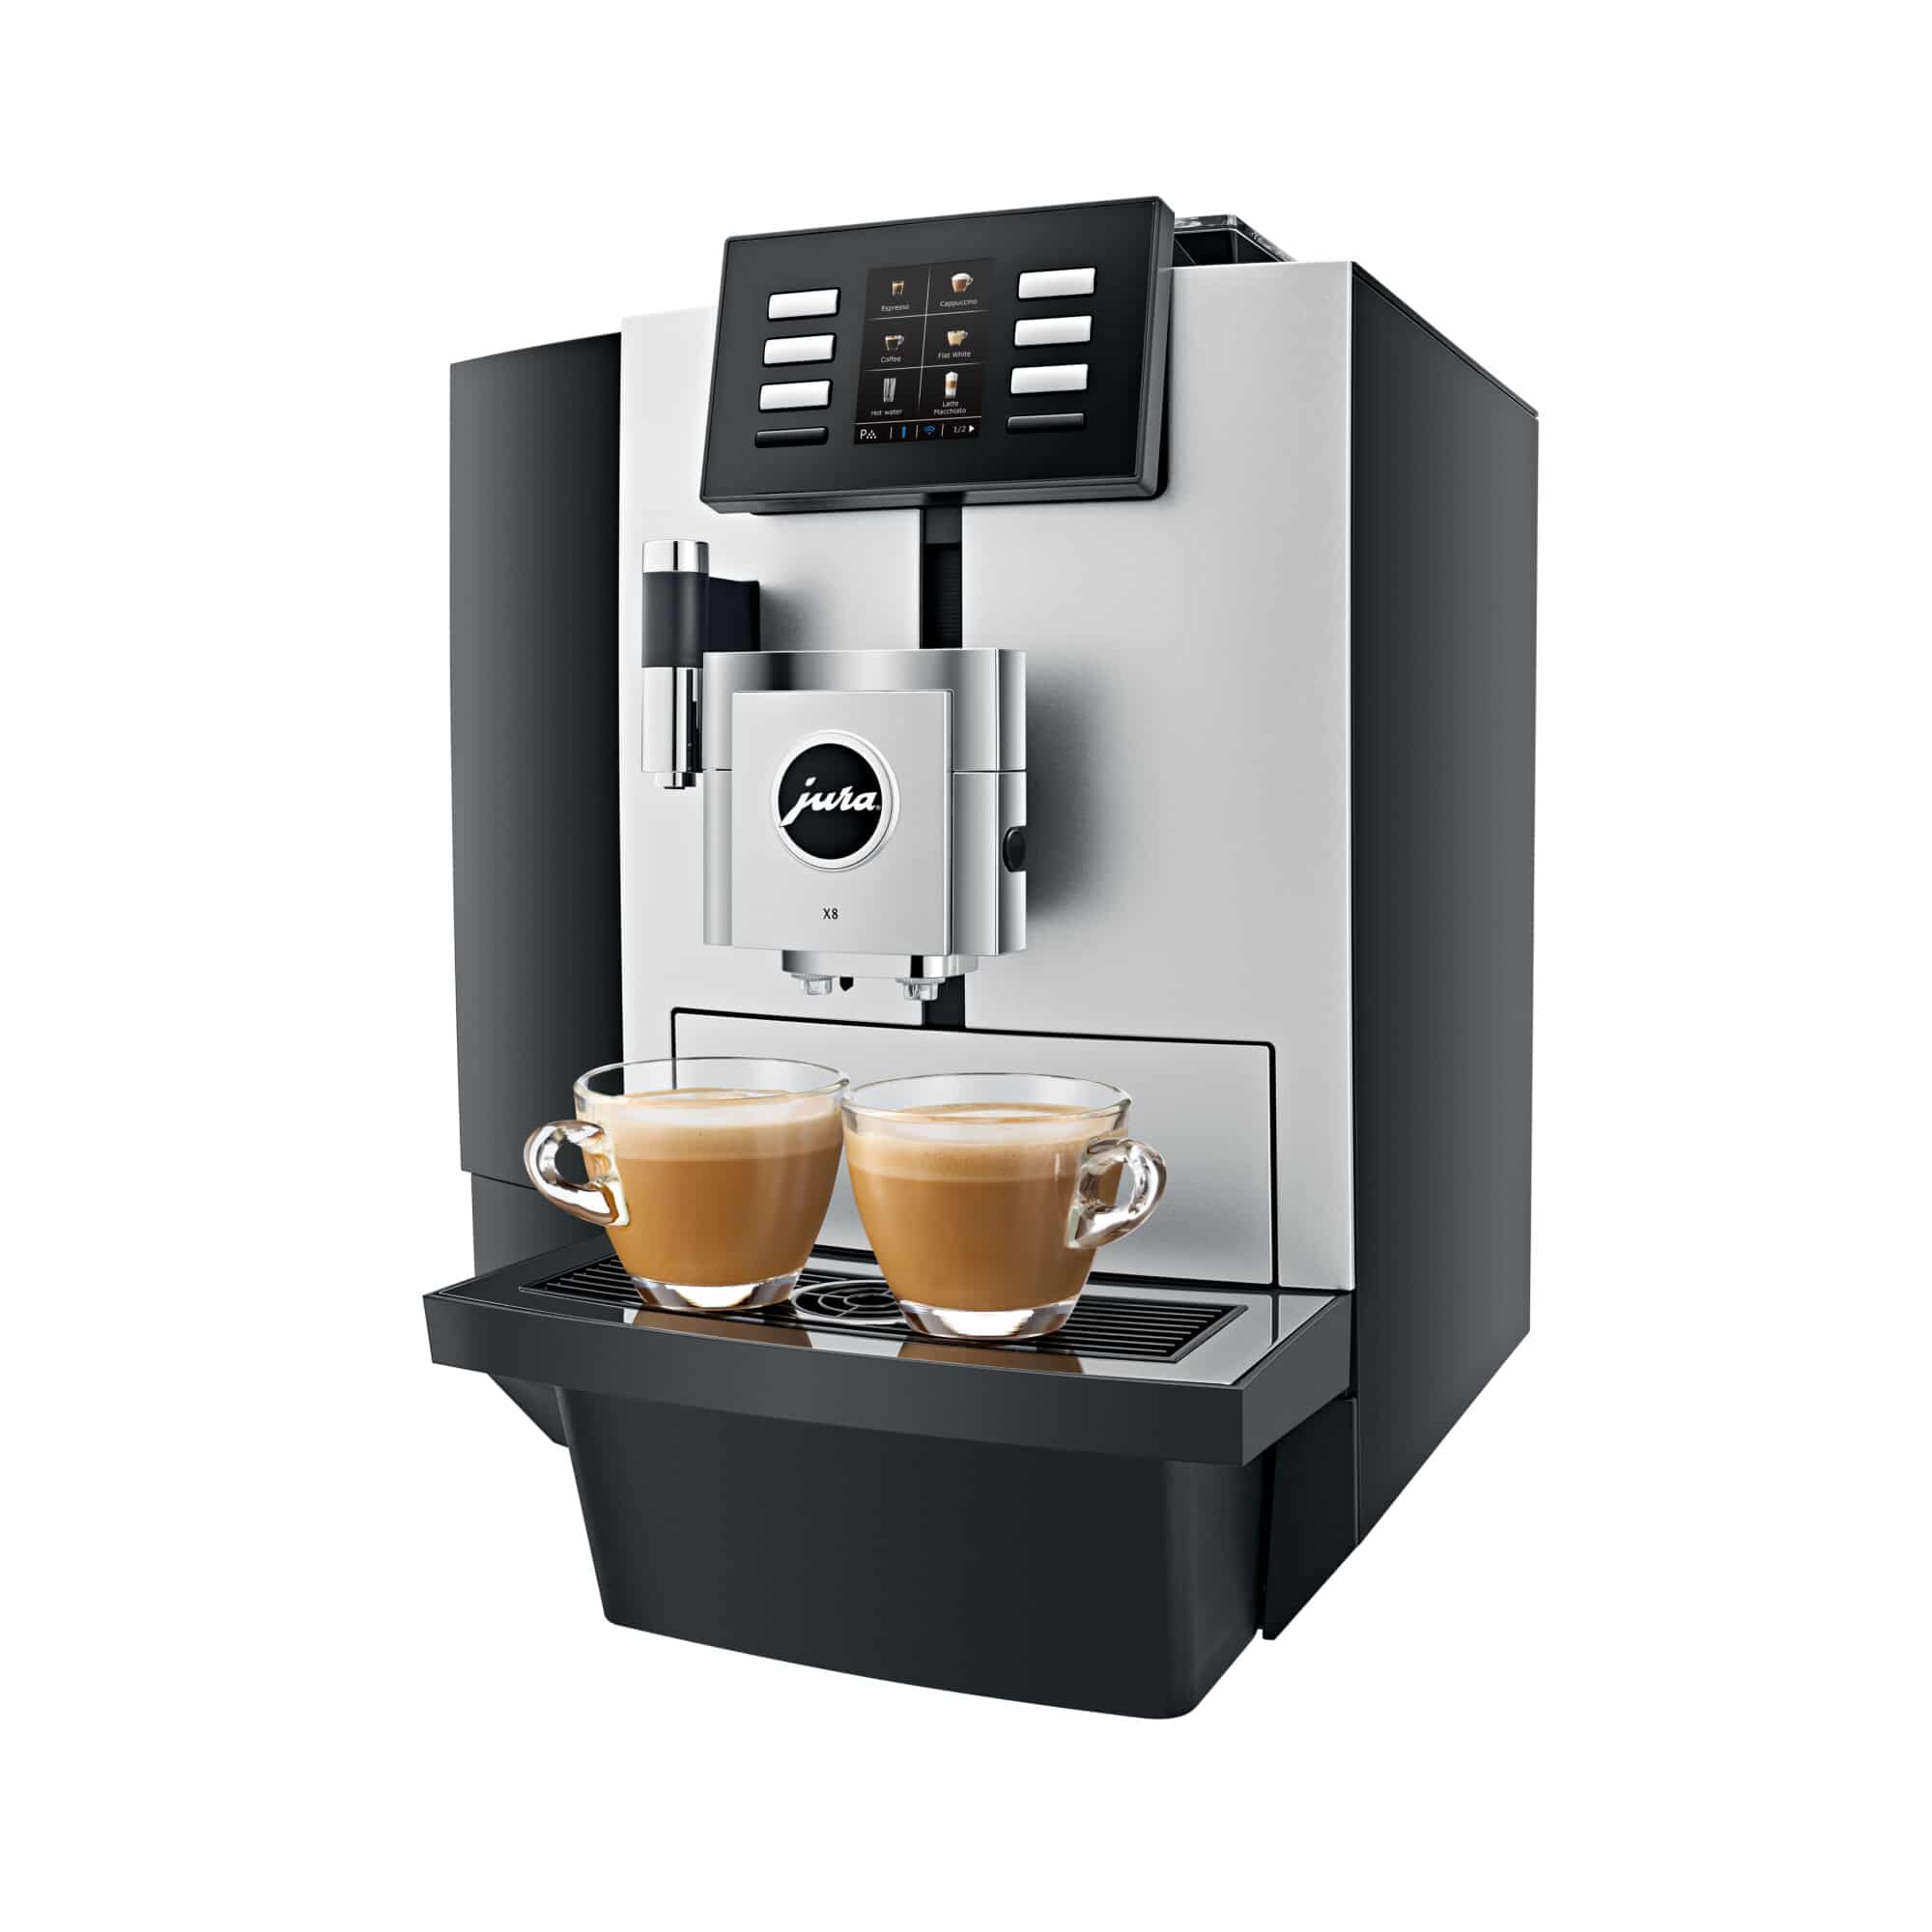 The most popular professional coffee machine for offices with 20 people. Lease or buy it and choose which of our five coffees you like best. 